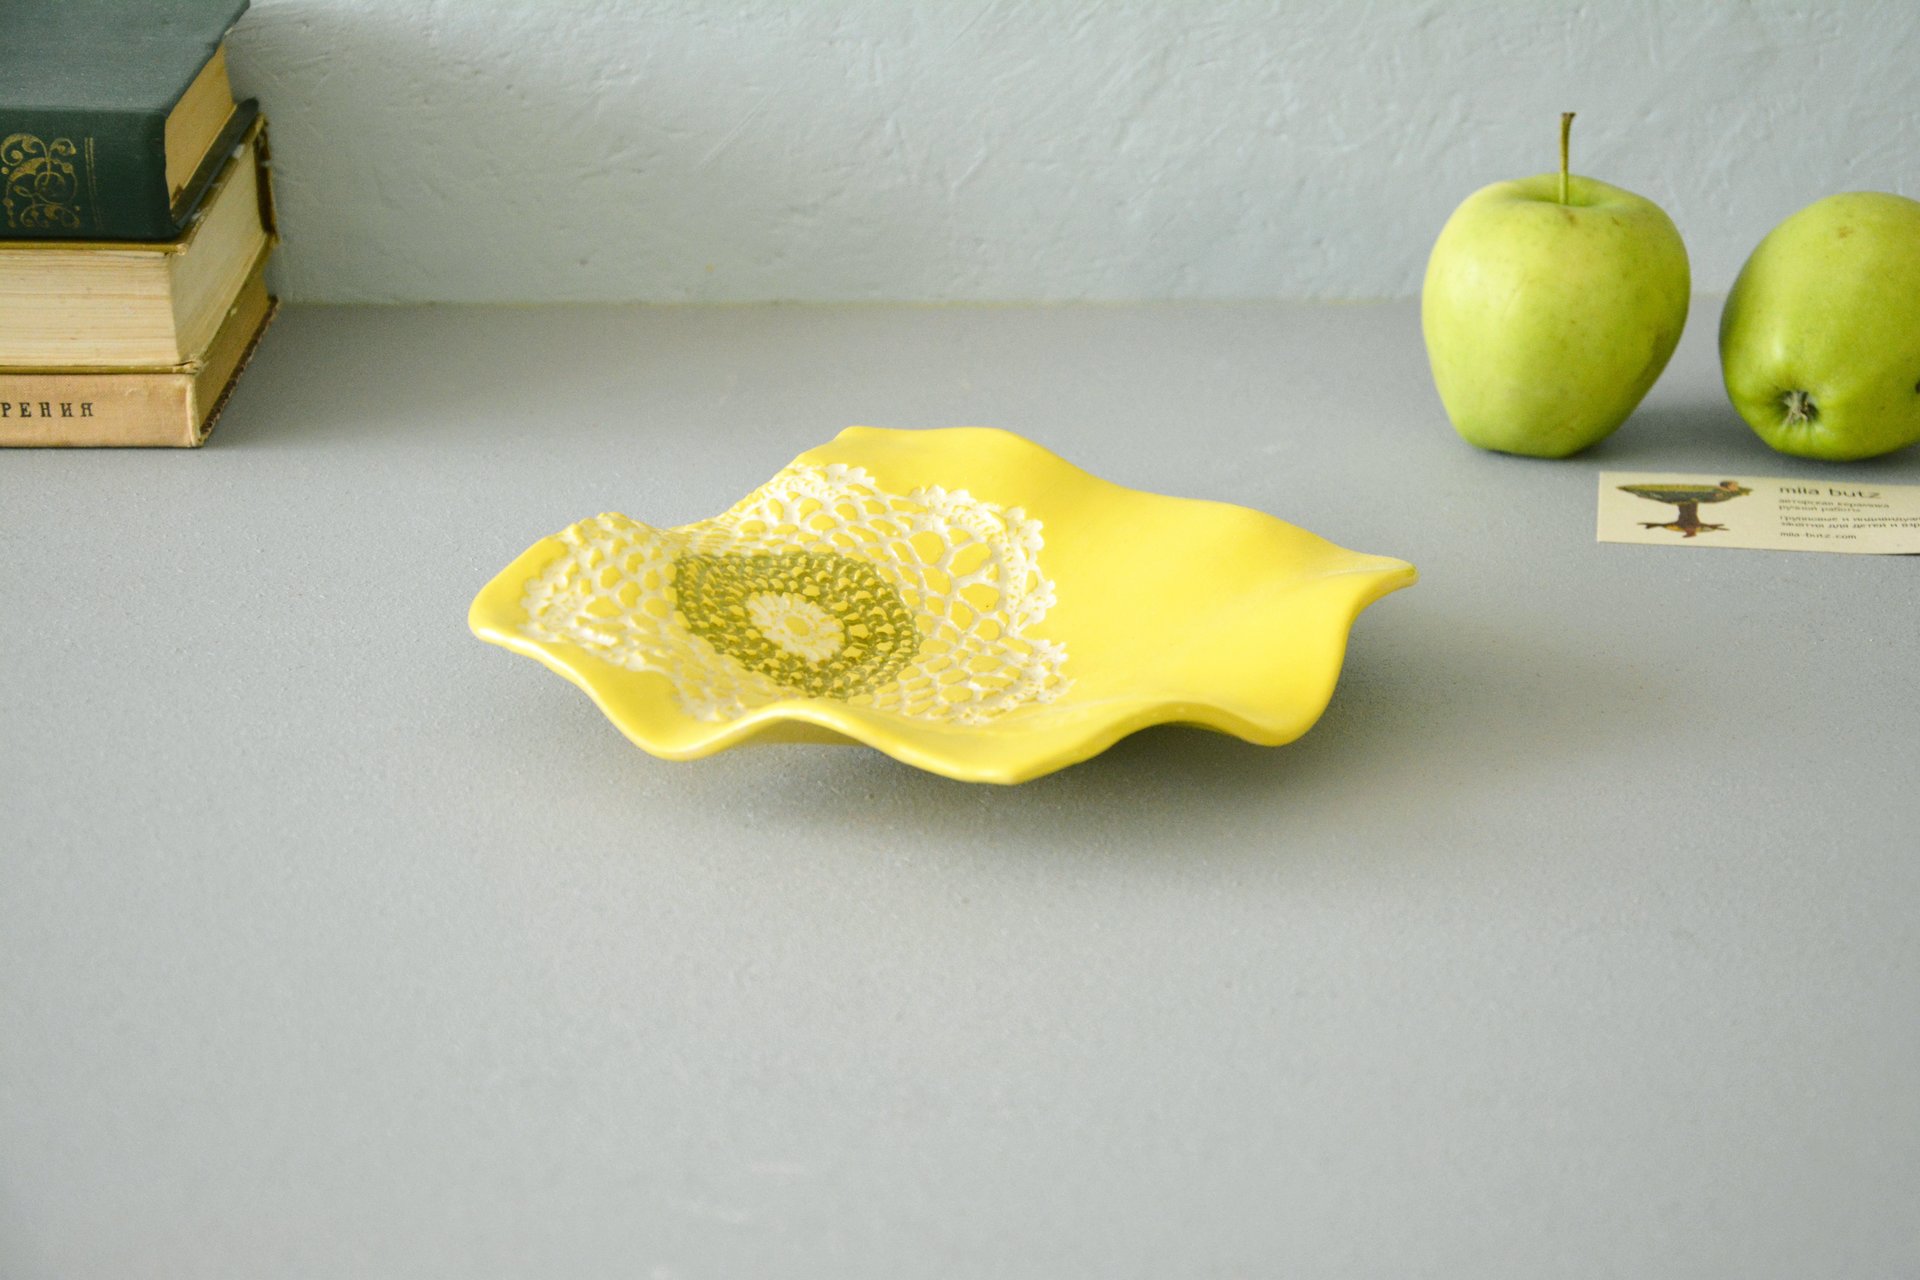 Ceramic plate of yellow square shape, width*height - 17 * 18 cm, height - 3.5 cm, photo 3 of 4.